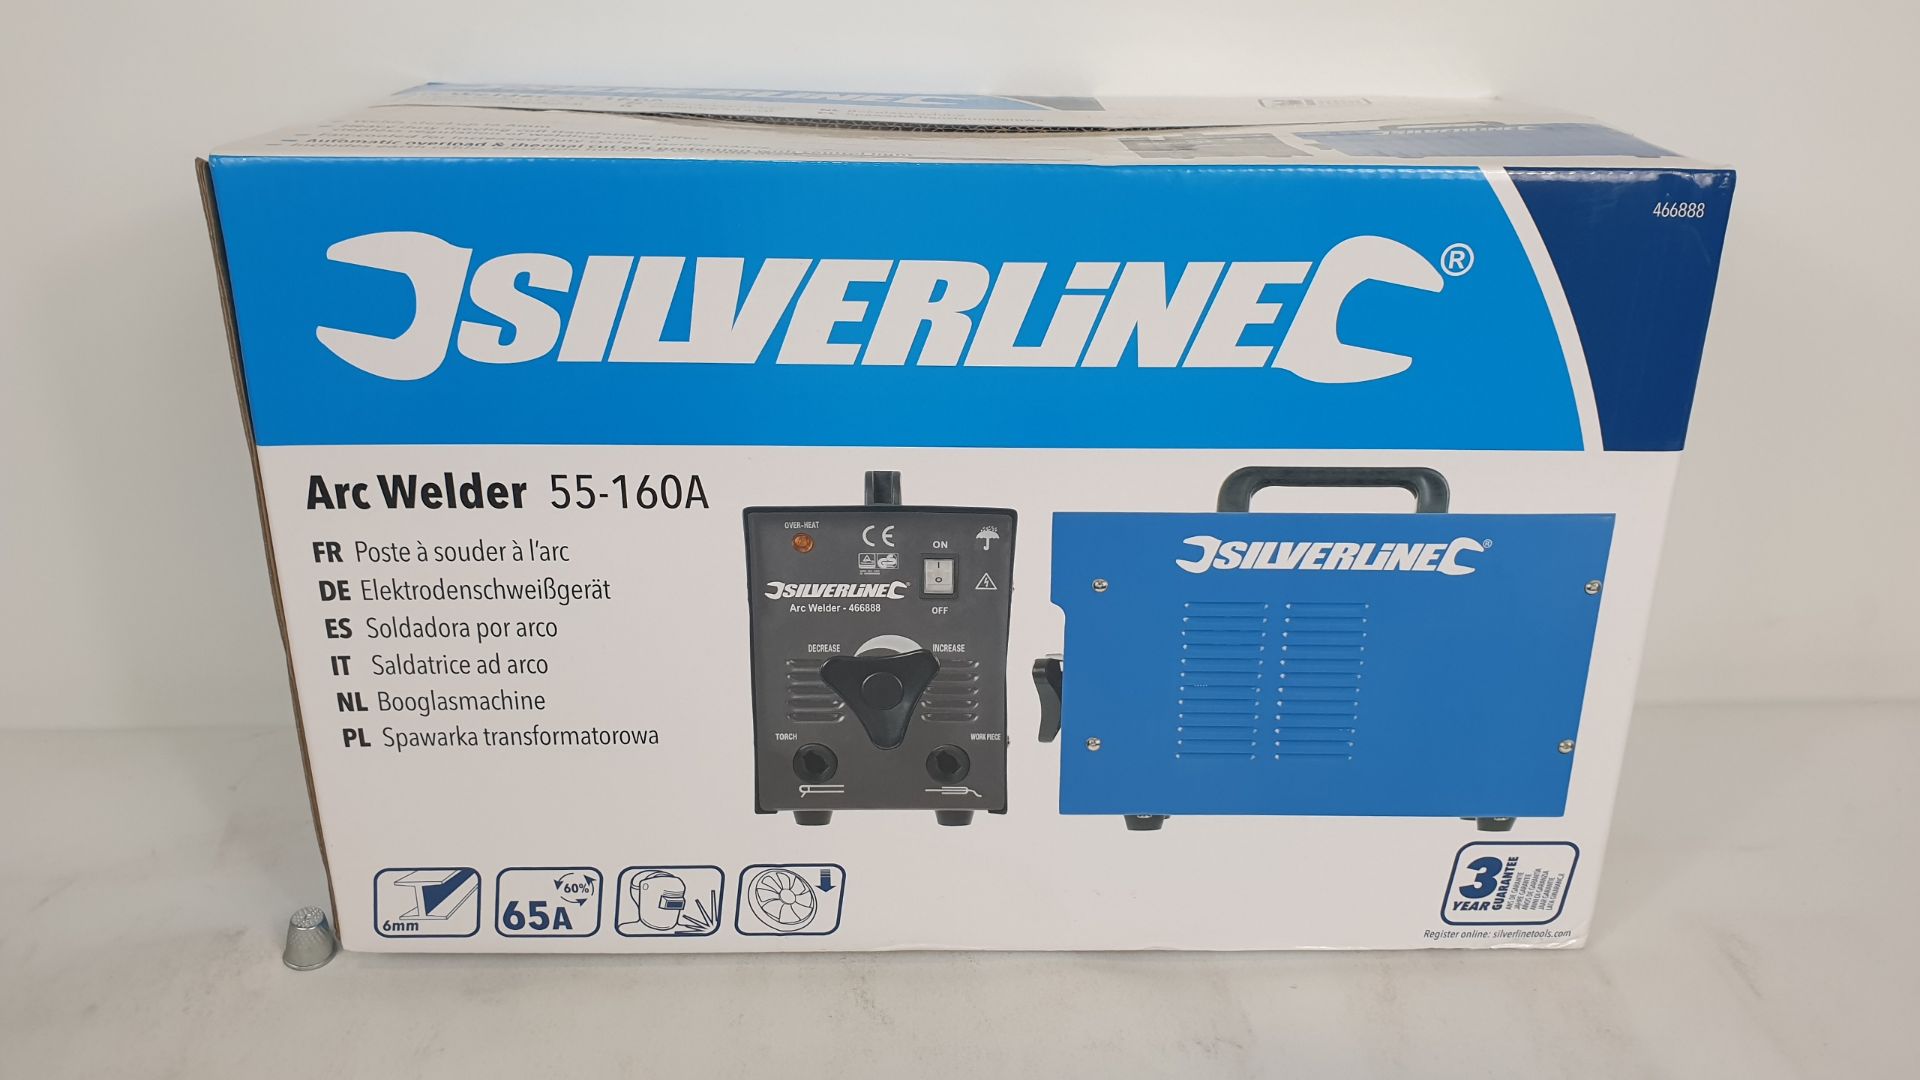 BRAND NEW BOXED SILVERLINE ARC WELDING SET 55-160A (PRODUCT CODE 466888). COMPRISING ARC WELDER,